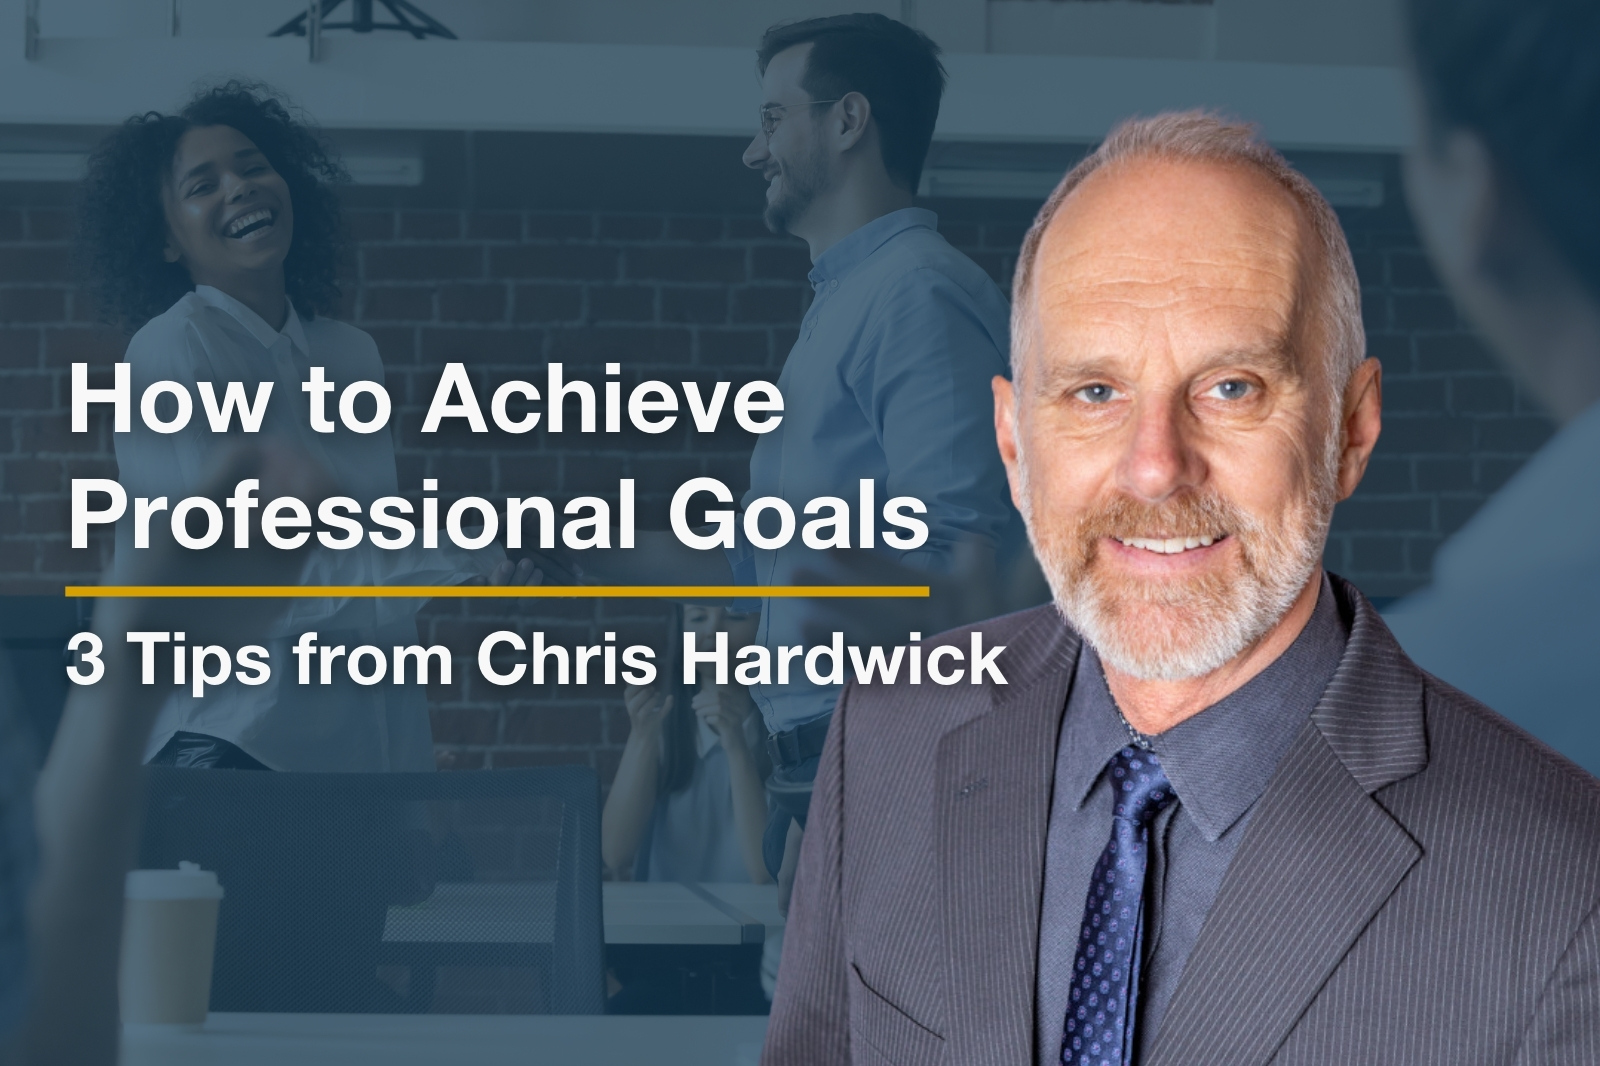 Headshot of Chris Hardwick with text next to him reading: "how to achieve professional goals - 3 tips from Chris Hardwick"